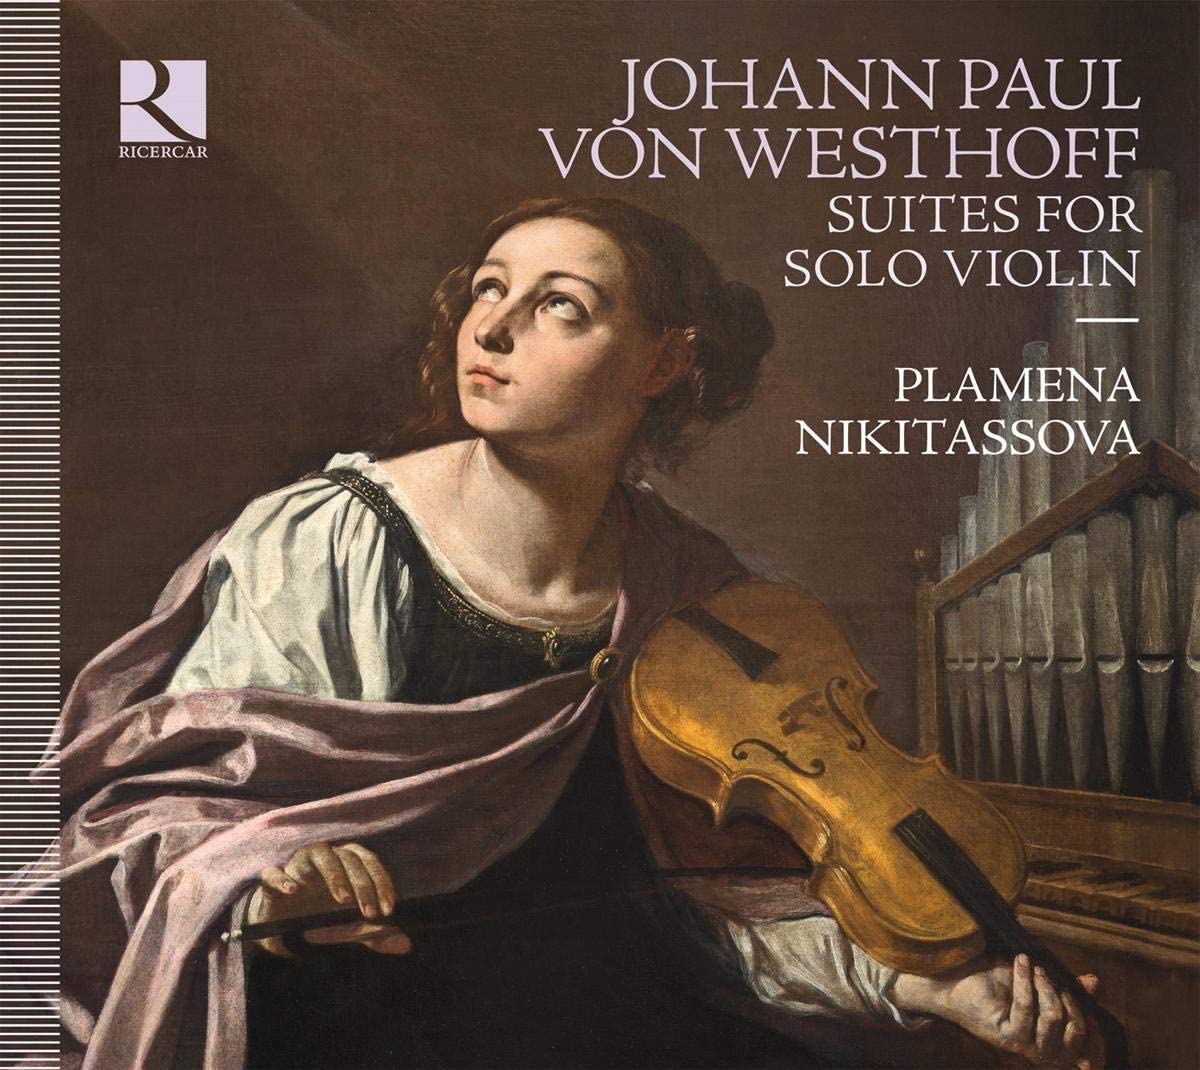 CD cover of von Westhoff's suites for solo violin